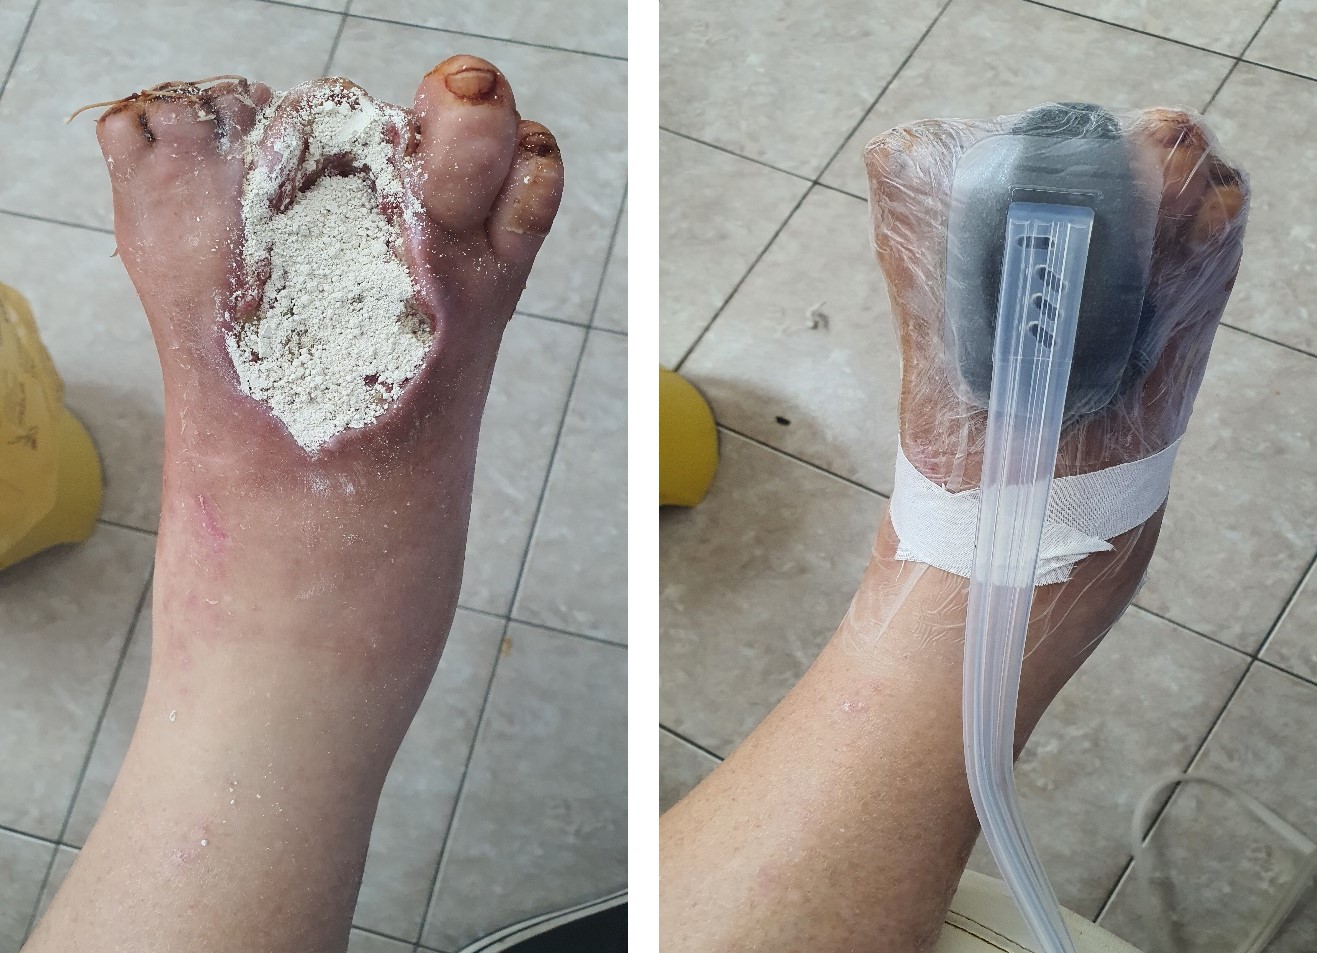 Treatment of an infected foot wound with VAC therapy